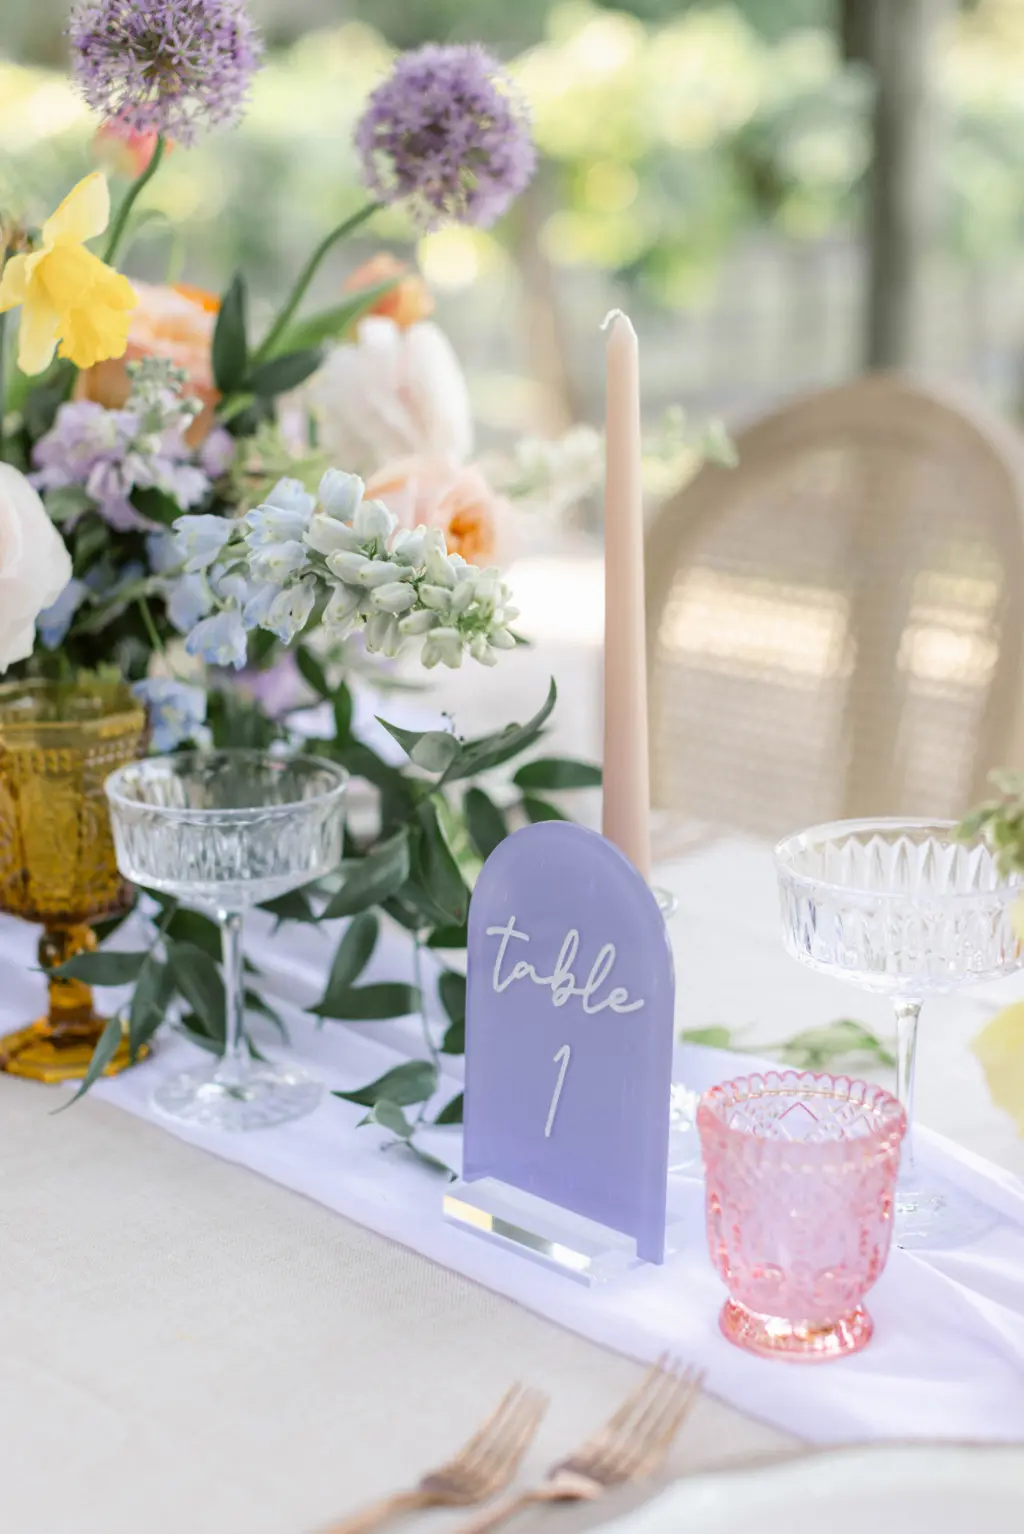 Purple Acrylic Table Number Sign Ideas for Whimsical Spring Wedding Reception Decor